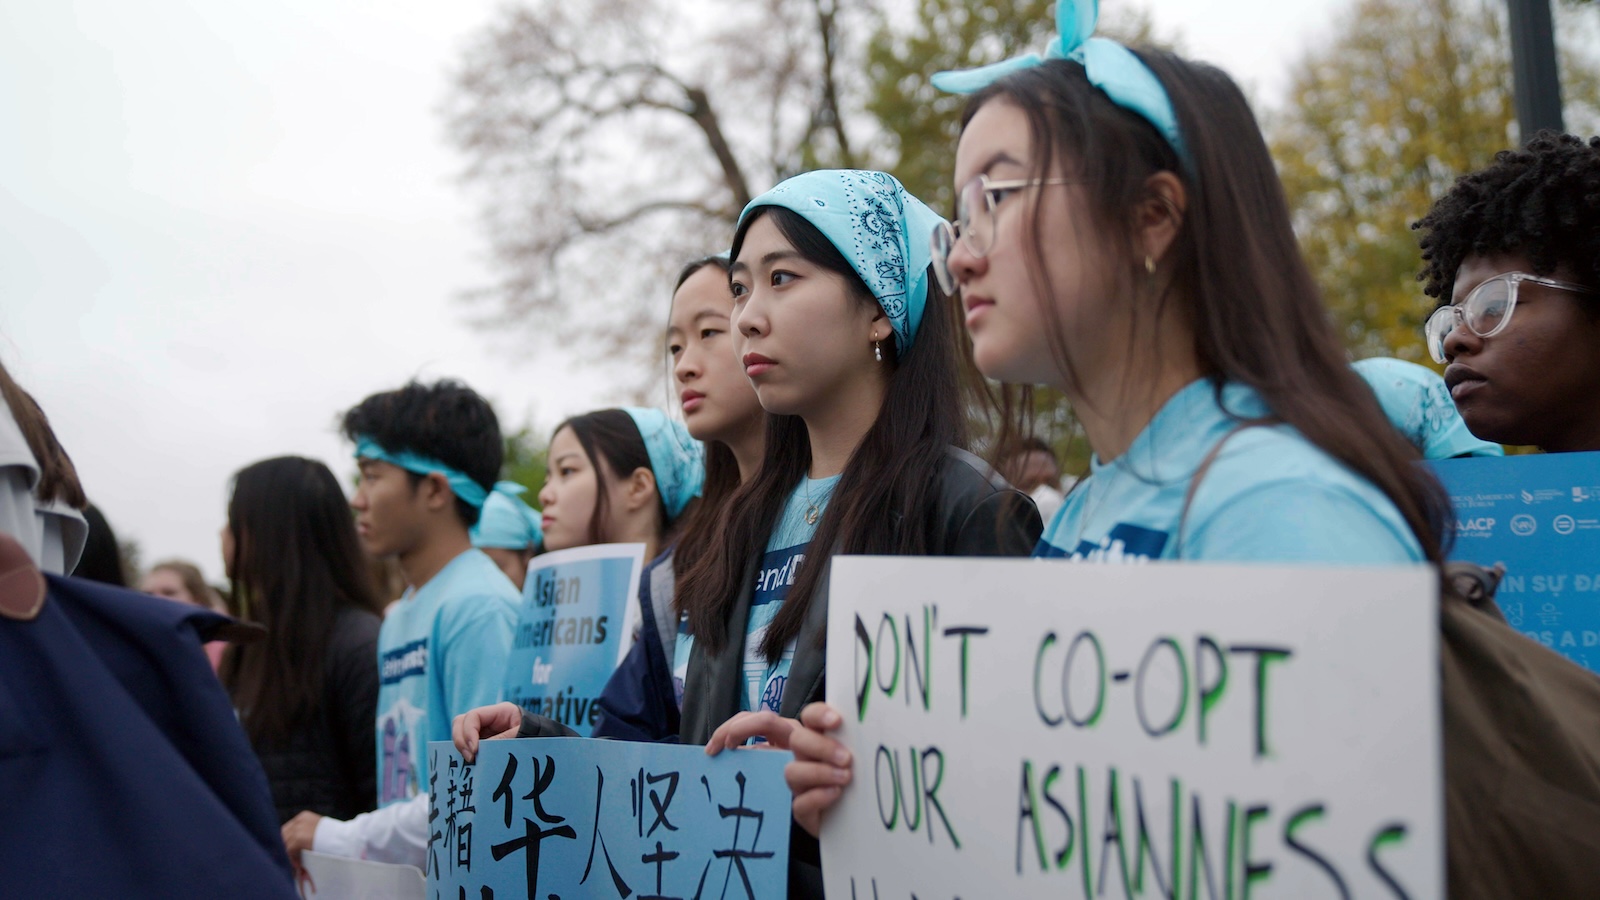 A group of students wearing light blue head gear and t-shirts hold up signs at what appears to be a protest